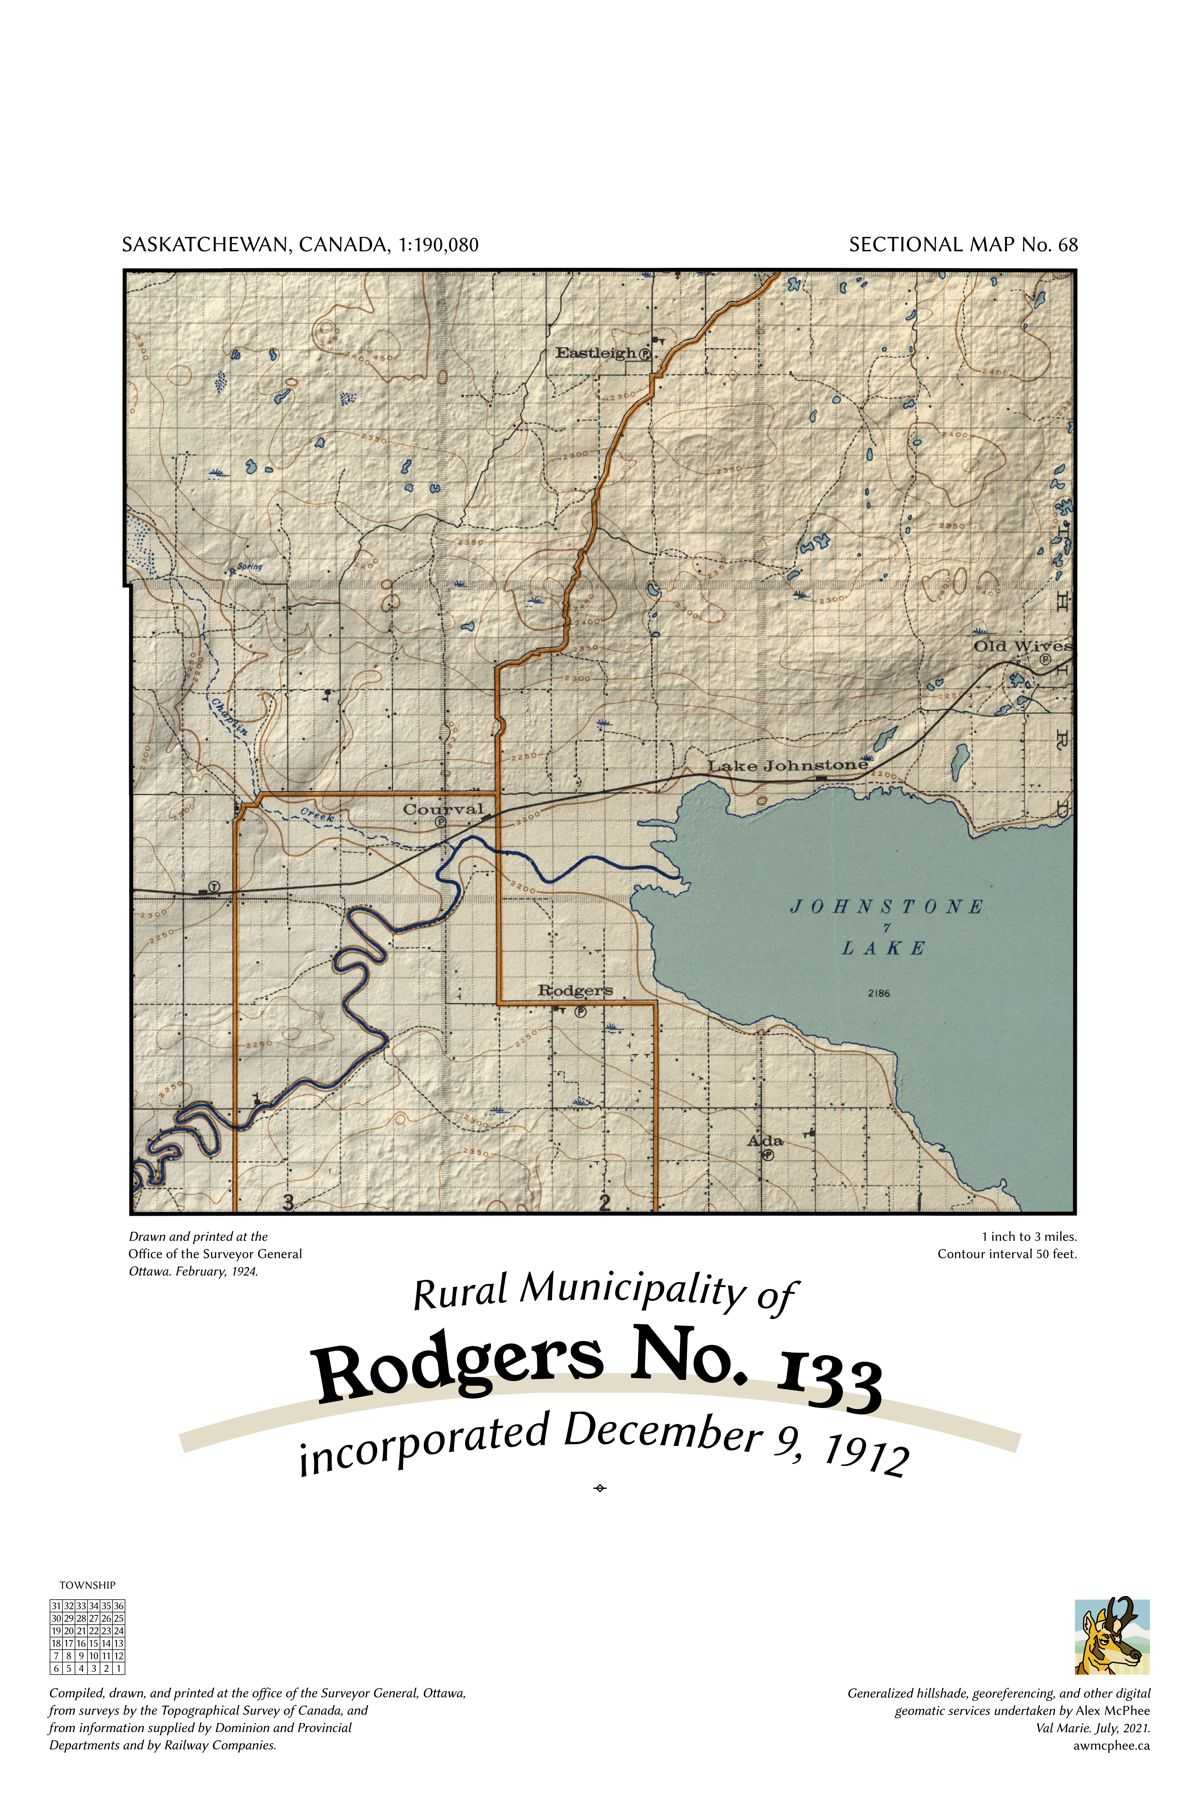 A map of the Rural Municipality of Rodgers No. 133.